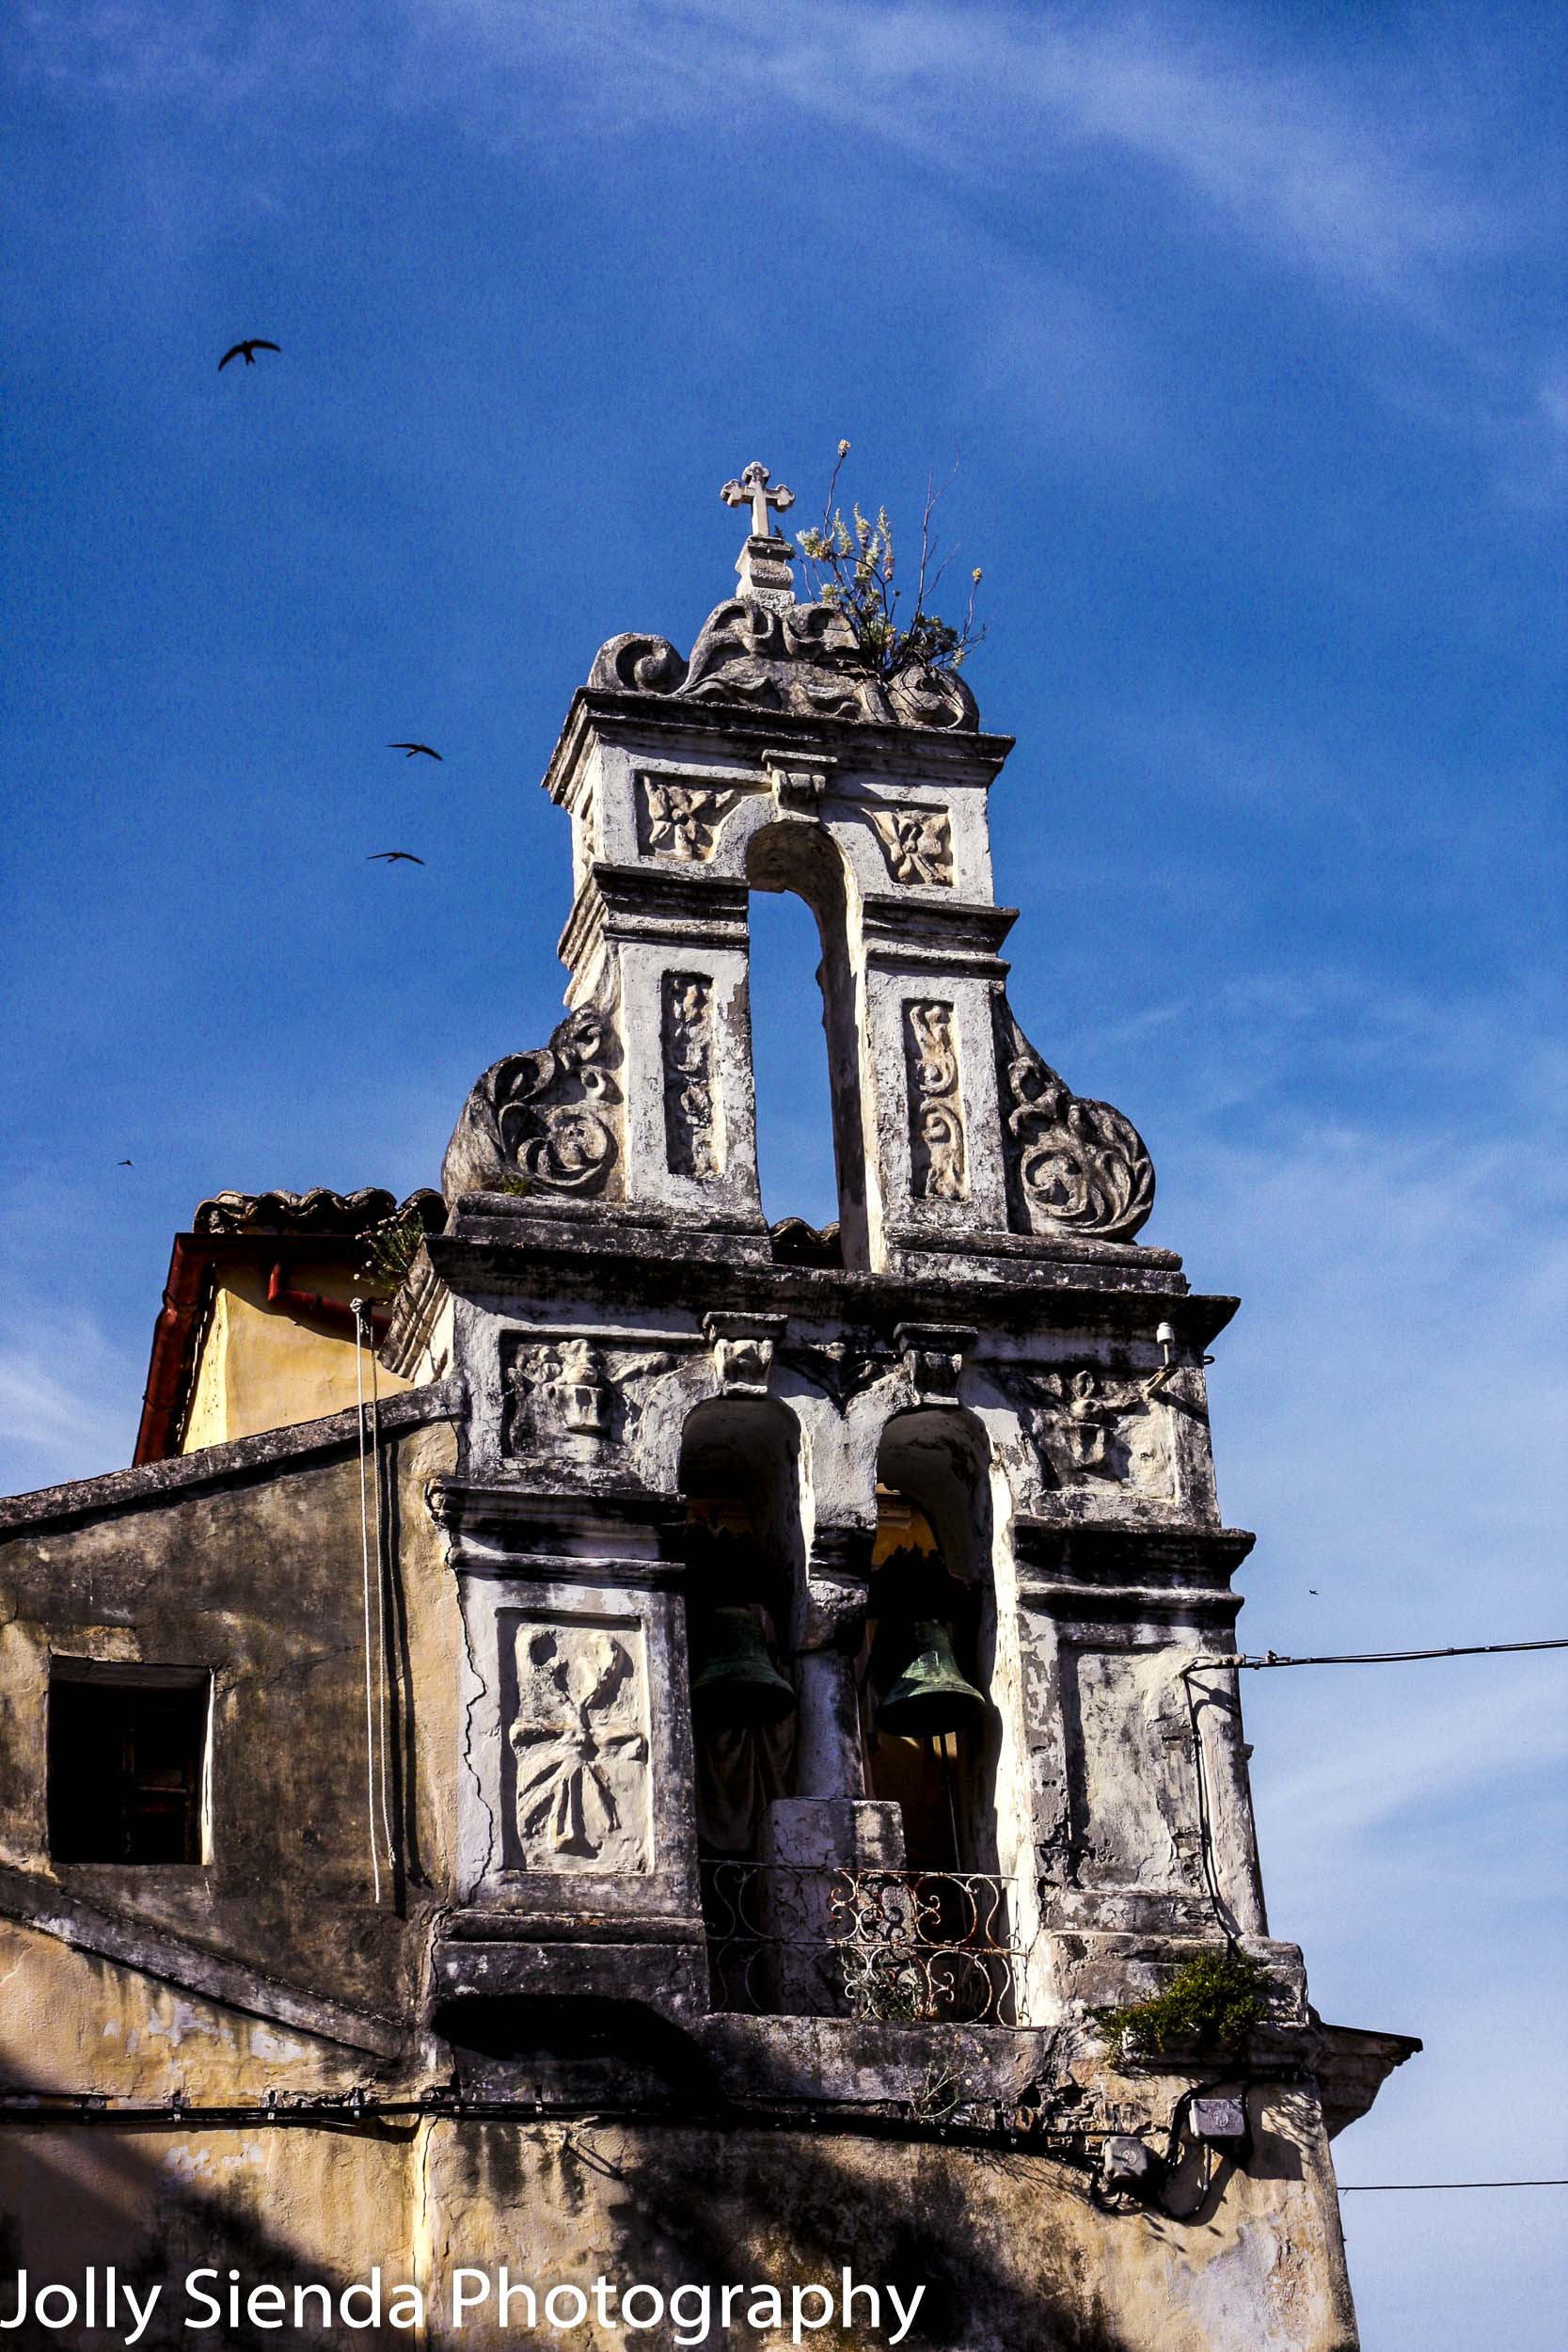 Old, ornate church facade with bronze bells and seagulls 